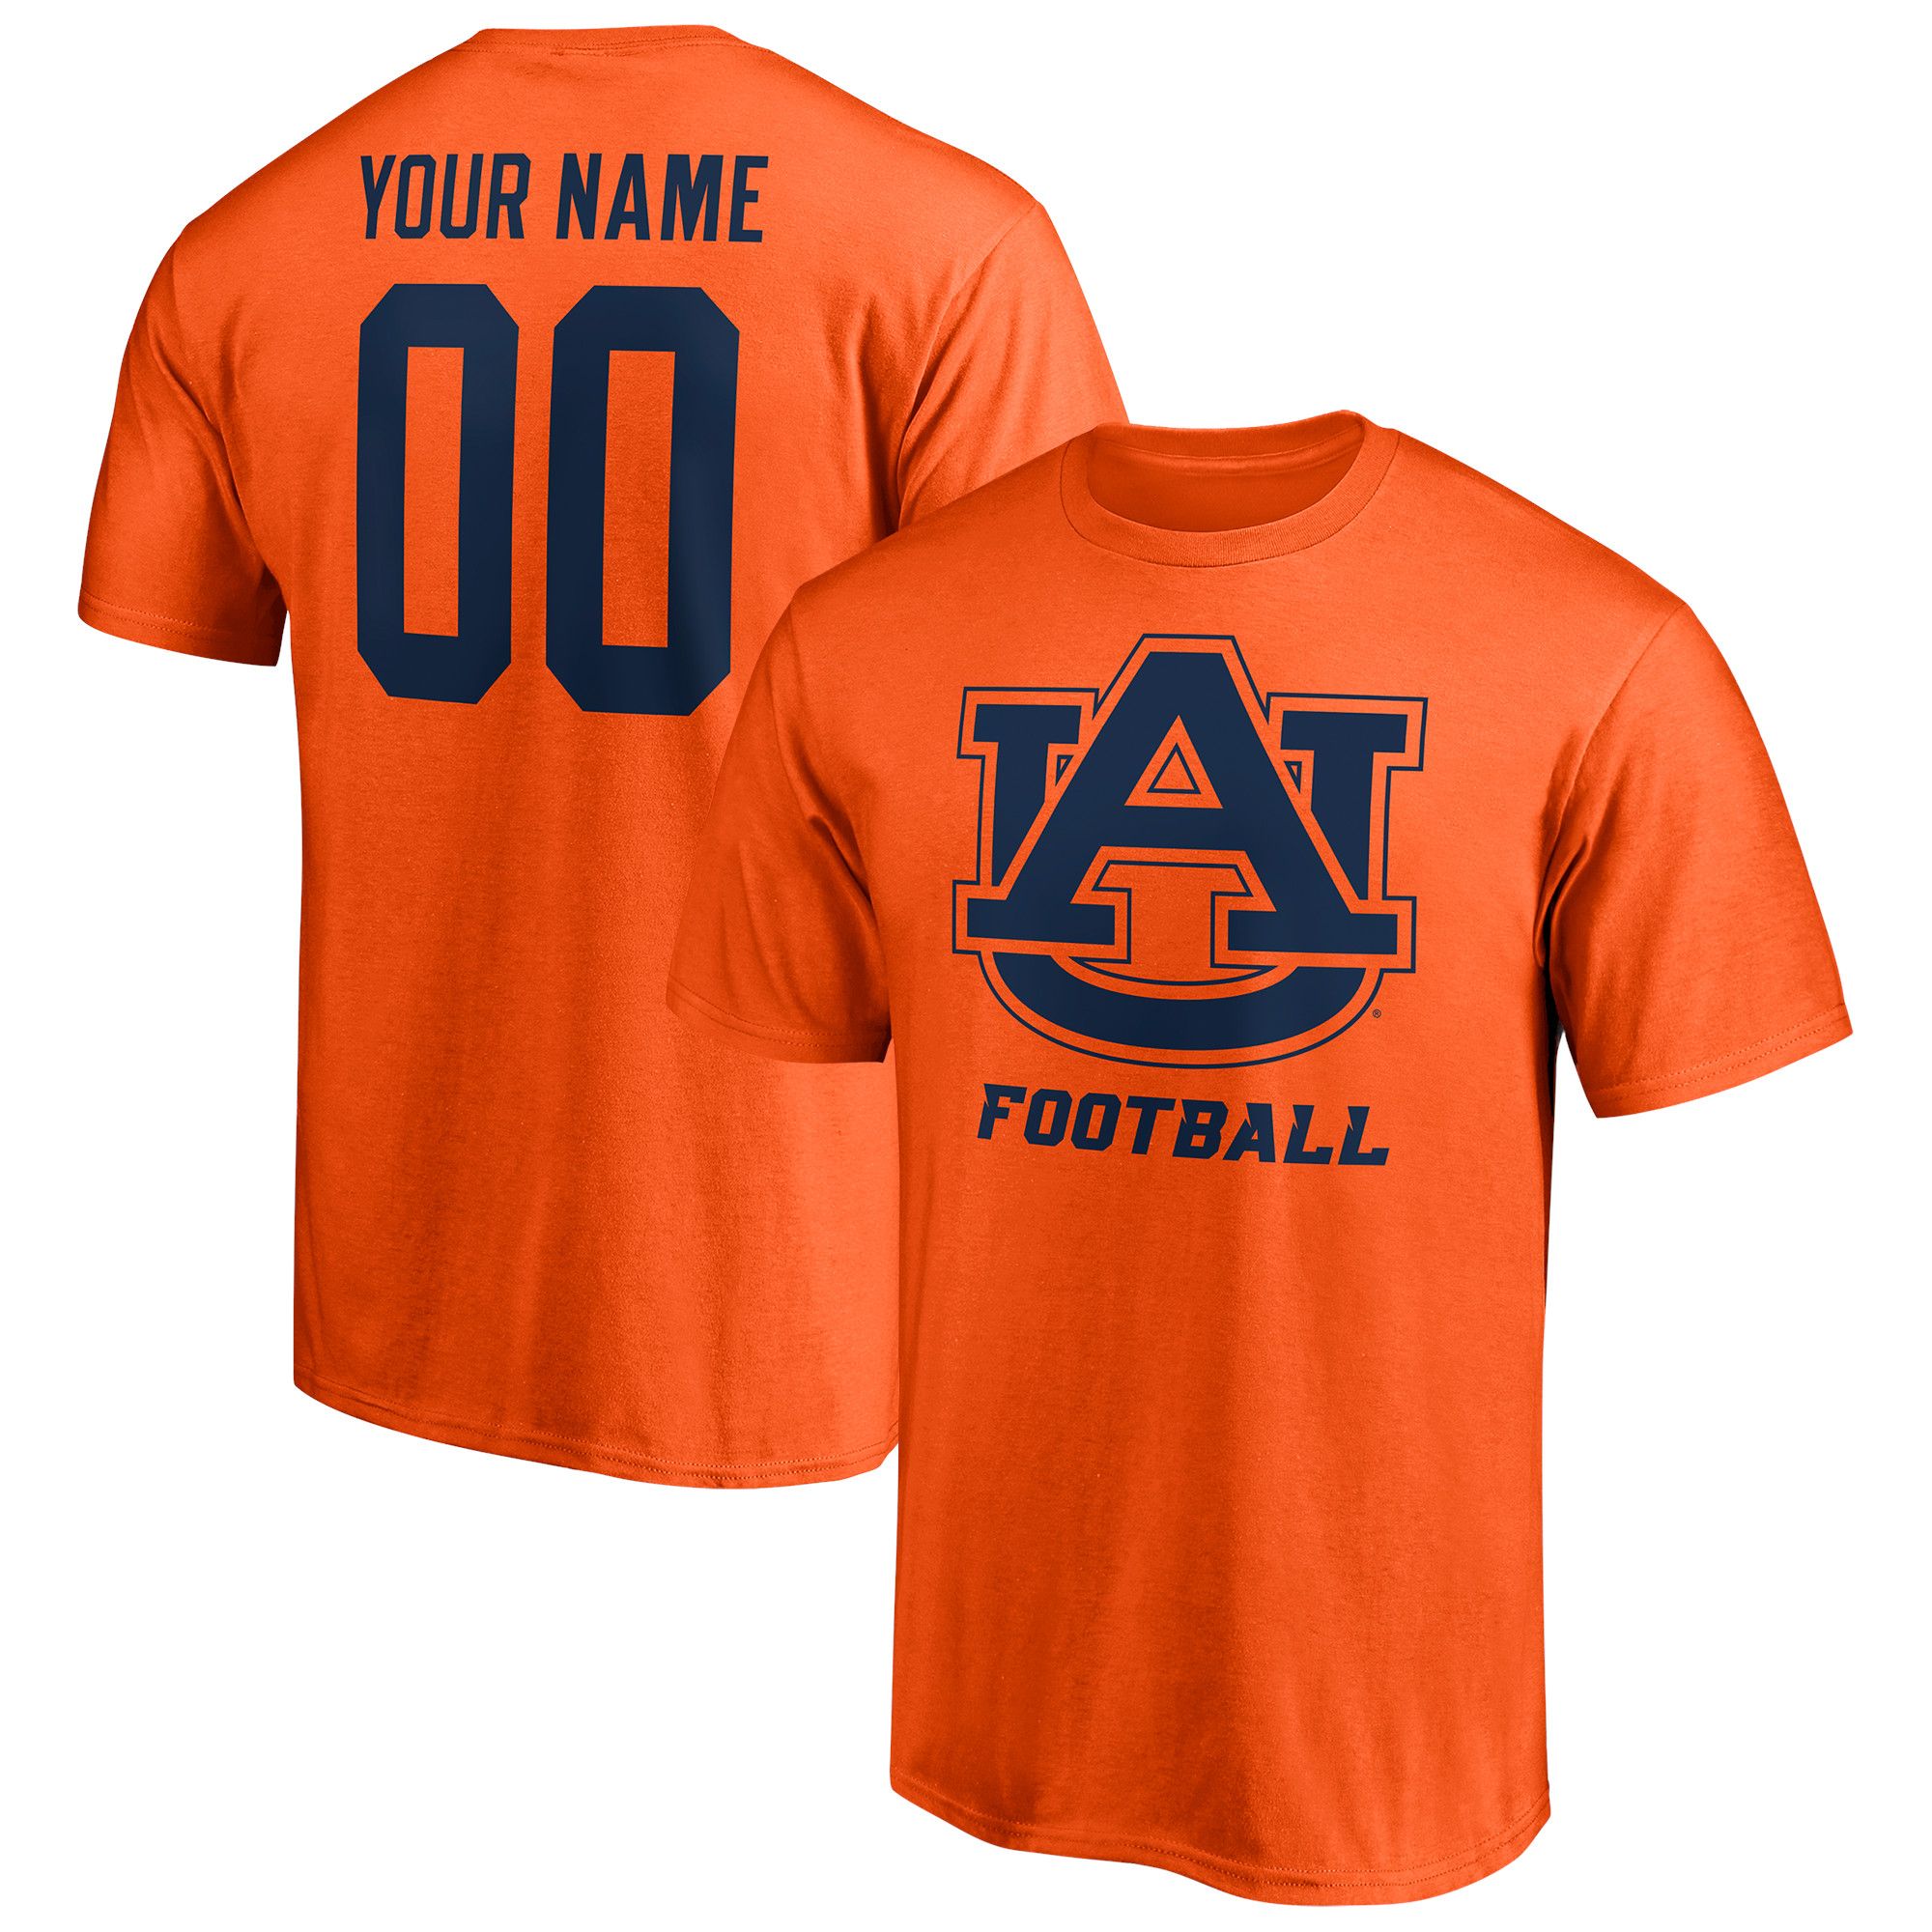 Men's Fanatics Branded Orange Auburn Tigers Personalized Any Name & Number One Color T-Shirt | Fanatics